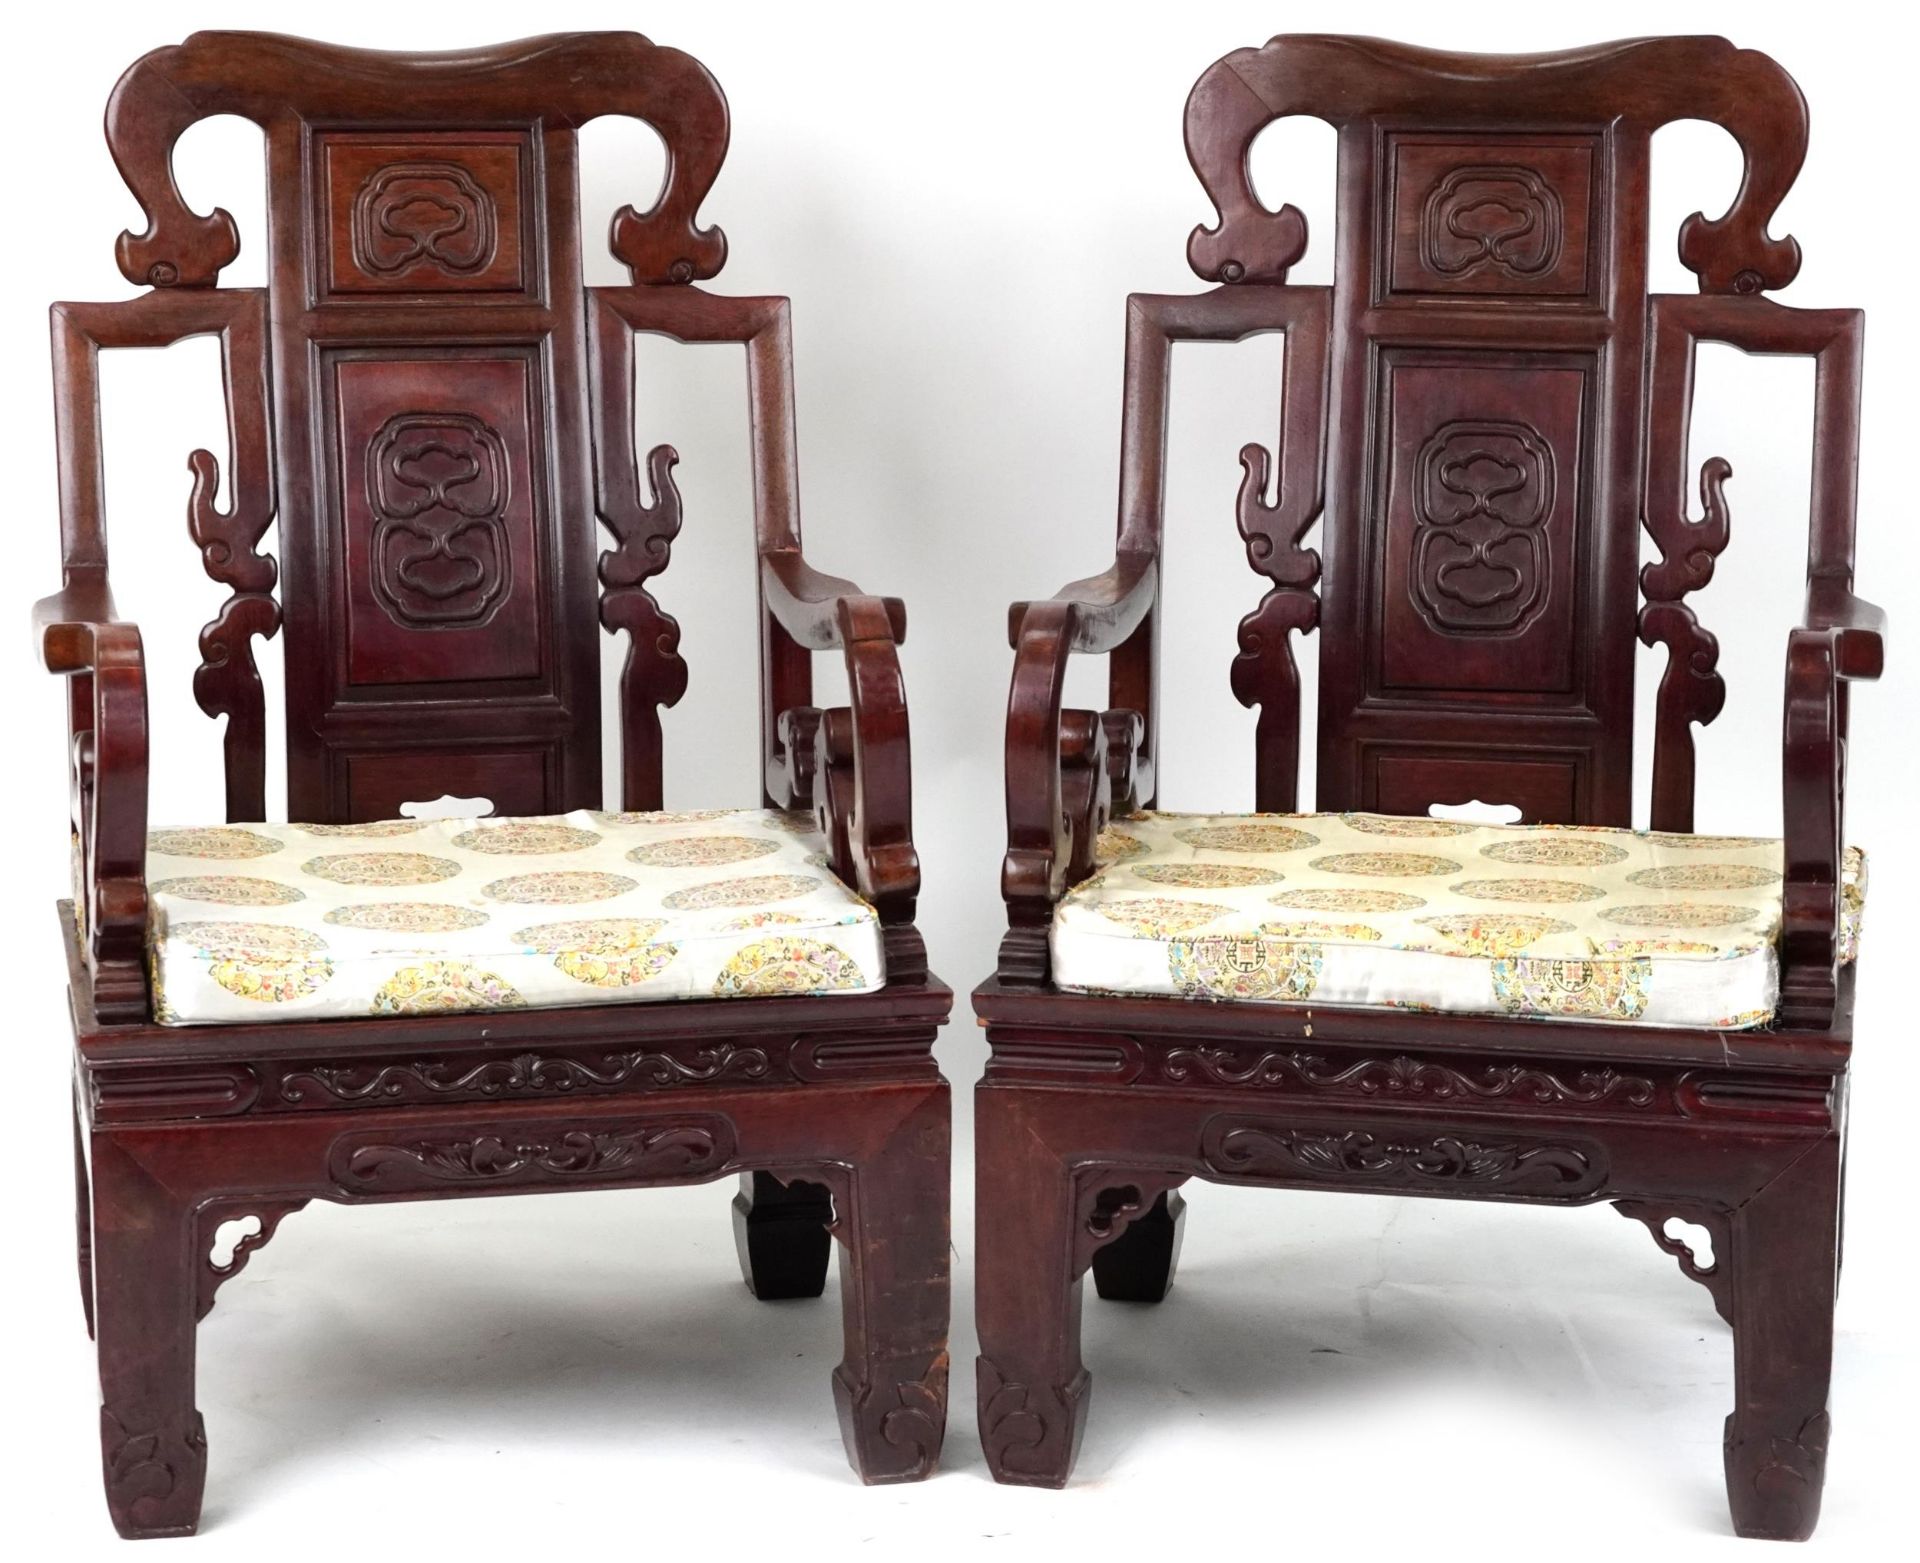 Pair of Chinese carved hardwood throne seats with lift of cushioned seats, possibly Hongmu, each